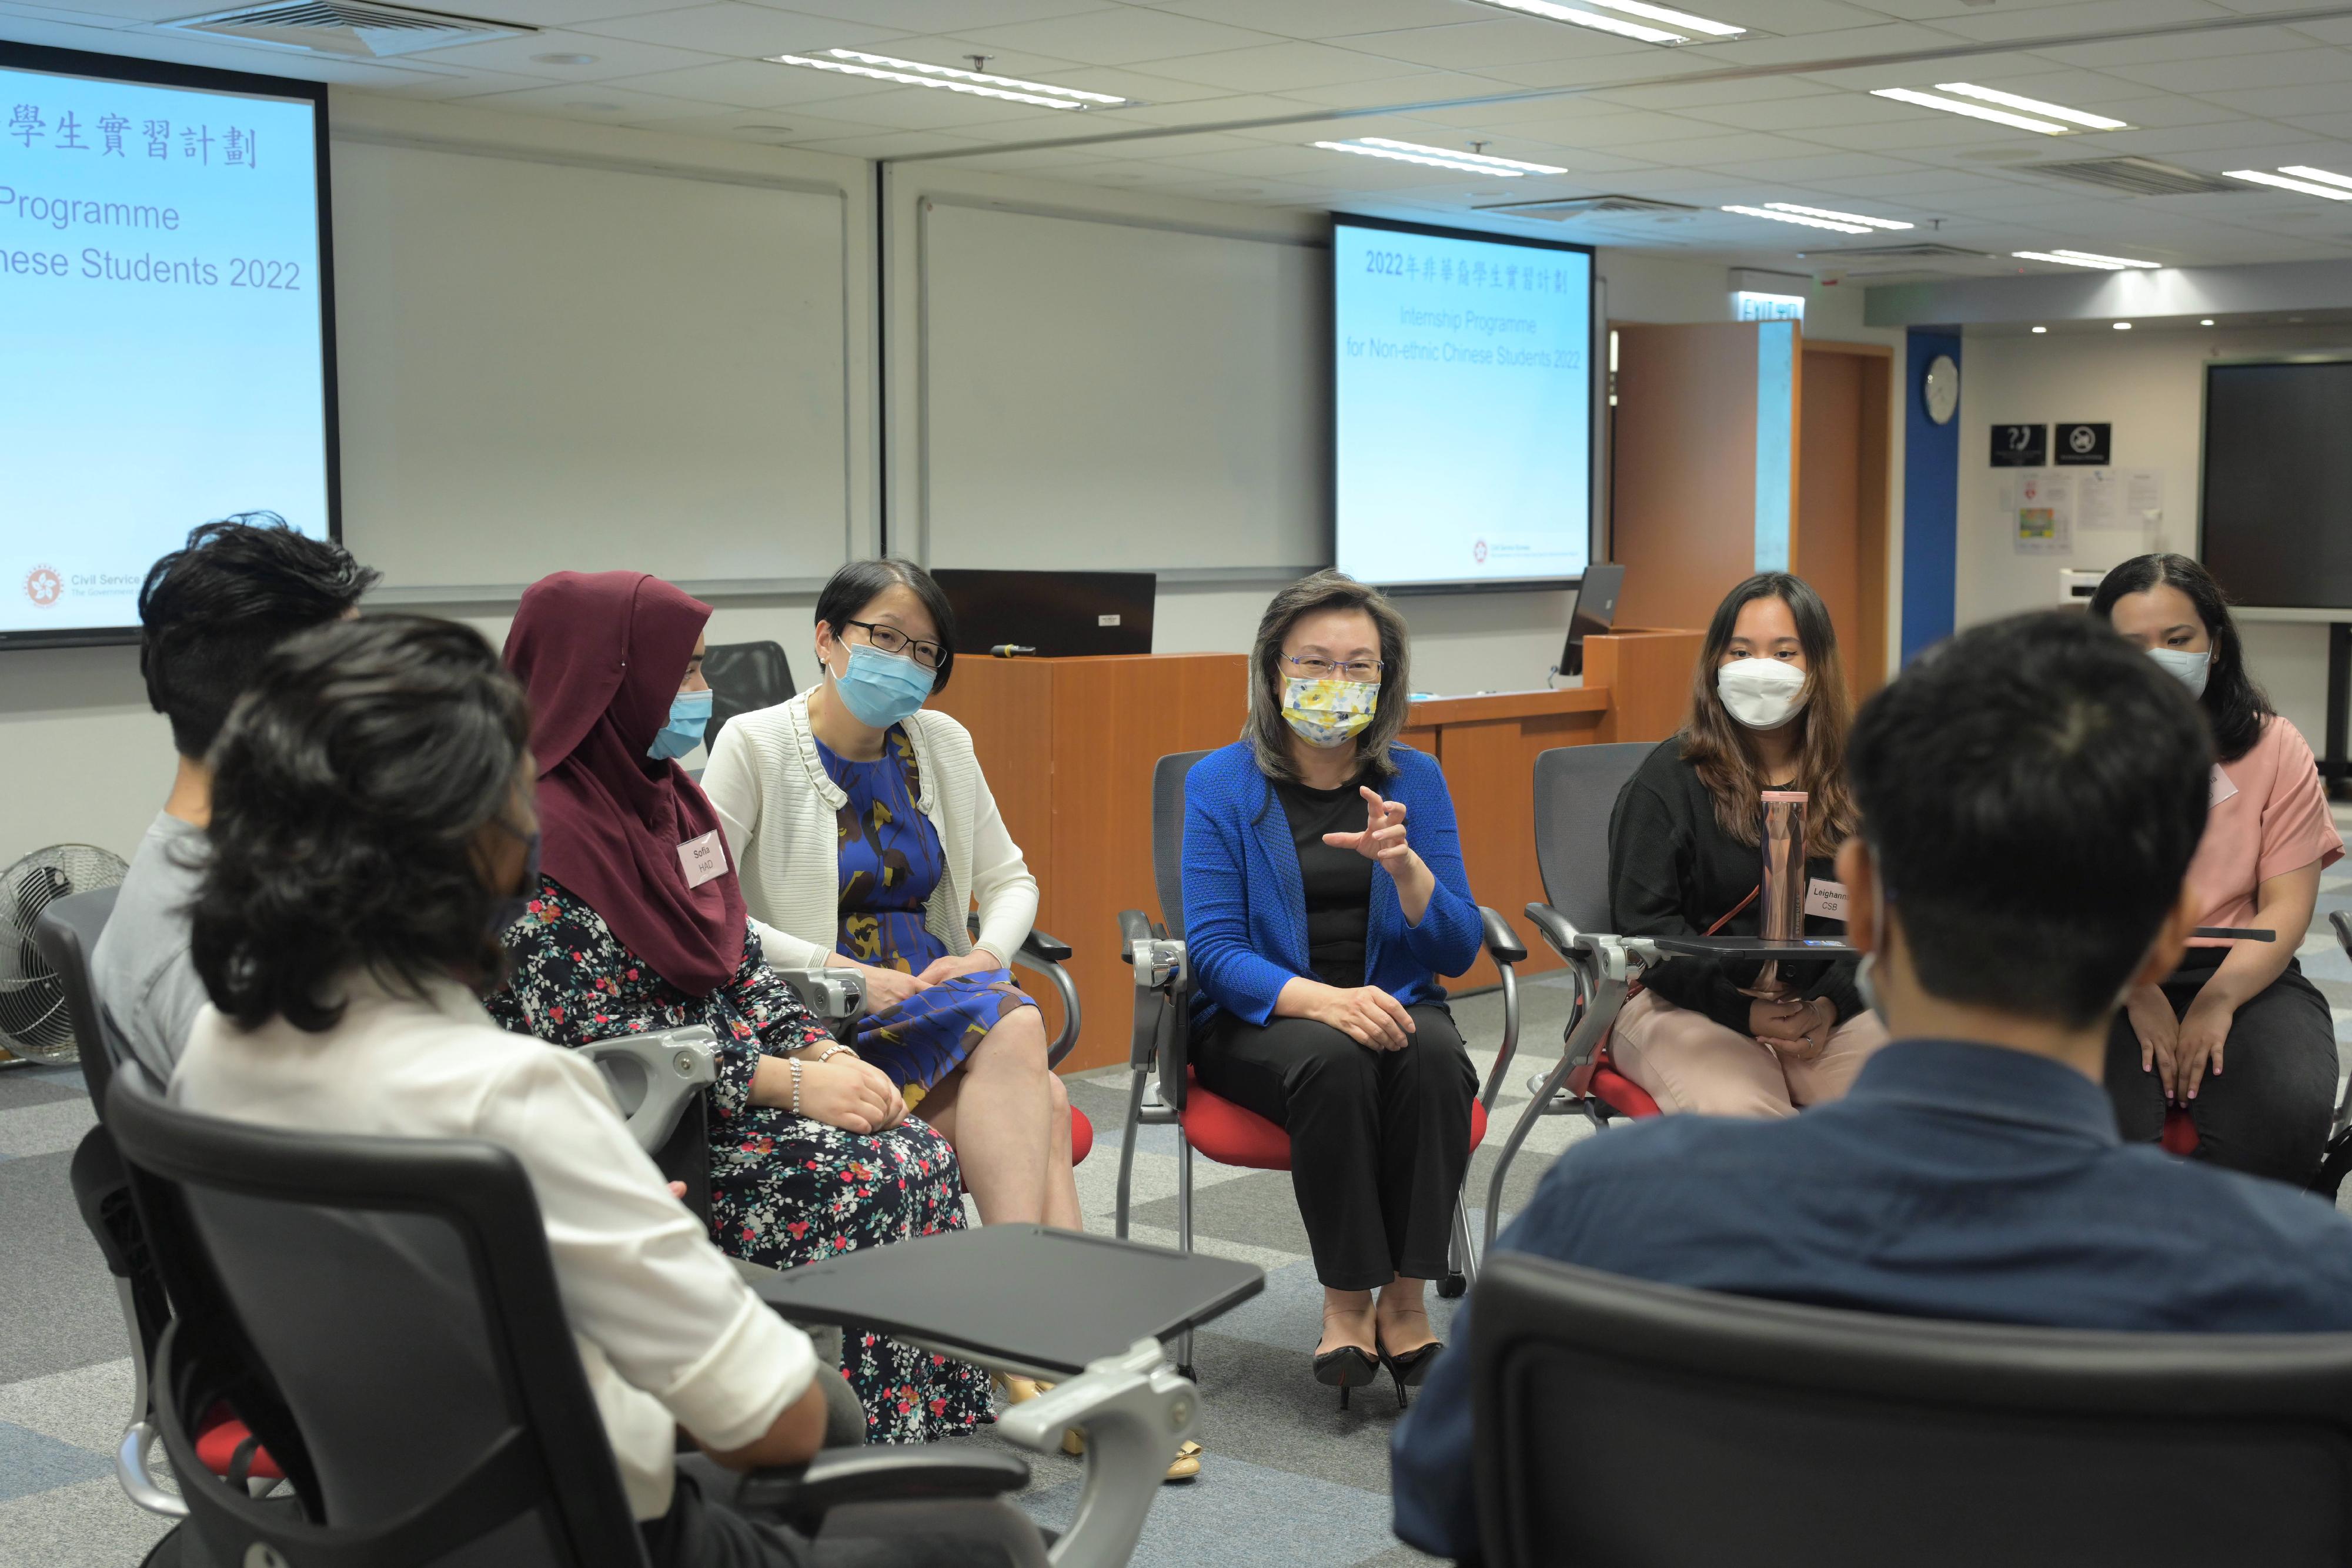 The Secretary for the Civil Service, Mrs Ingrid Yeung, today (August 24) met with non-ethnic Chinese students participating in a government internship programme. Photo shows Mrs Yeung (third right) chatting with the interns to learn about their internship experience and takeaways.